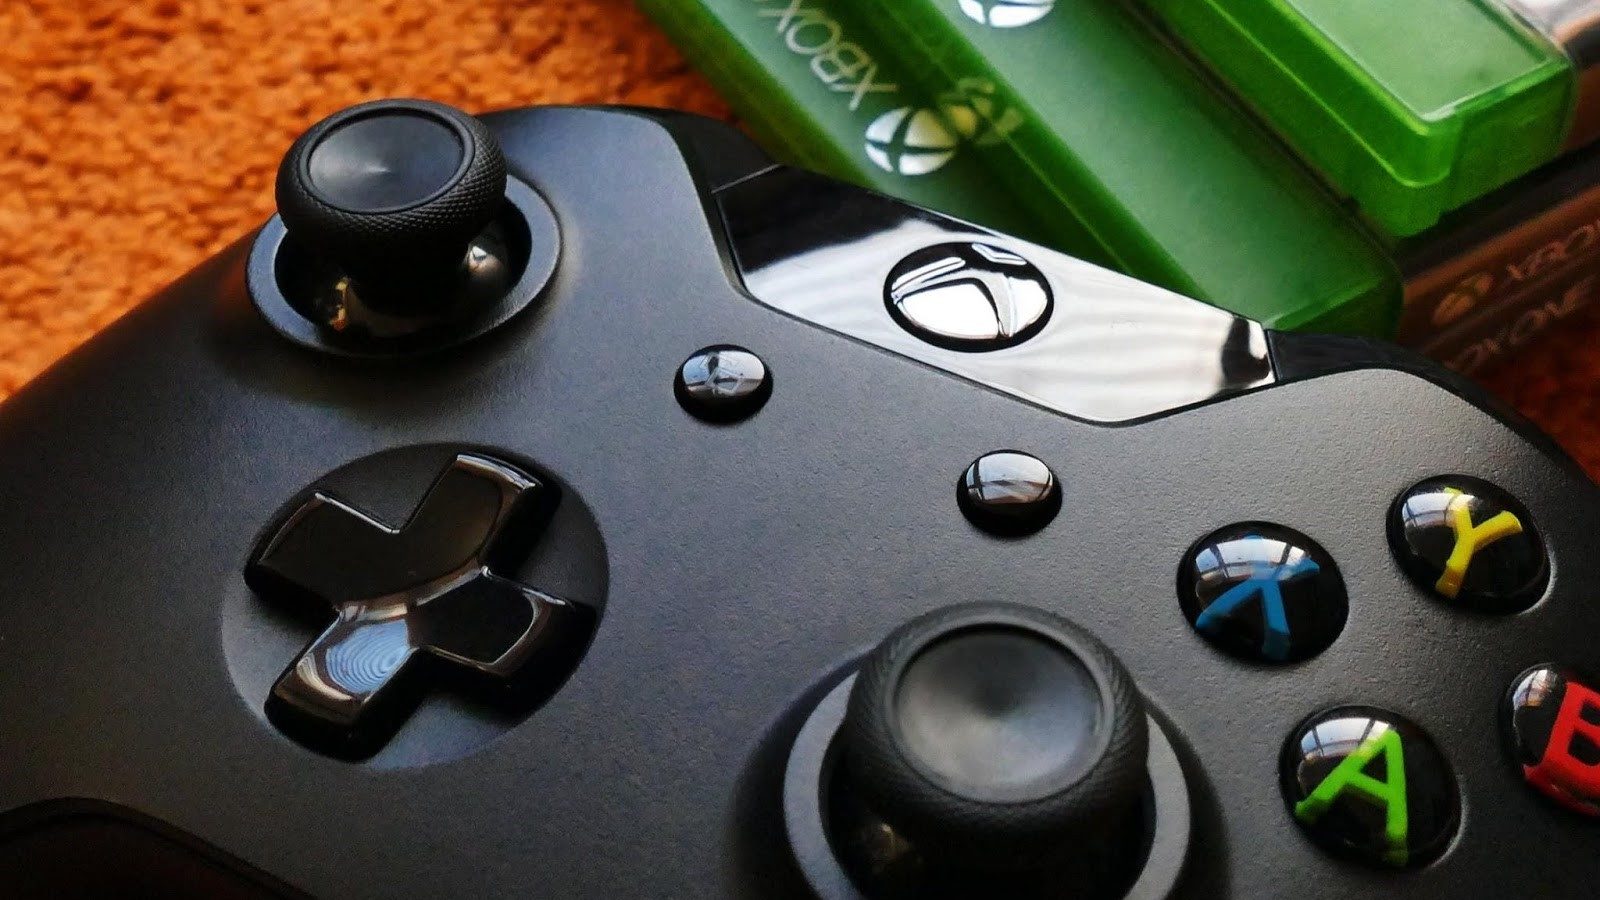 The Xbox One controller.